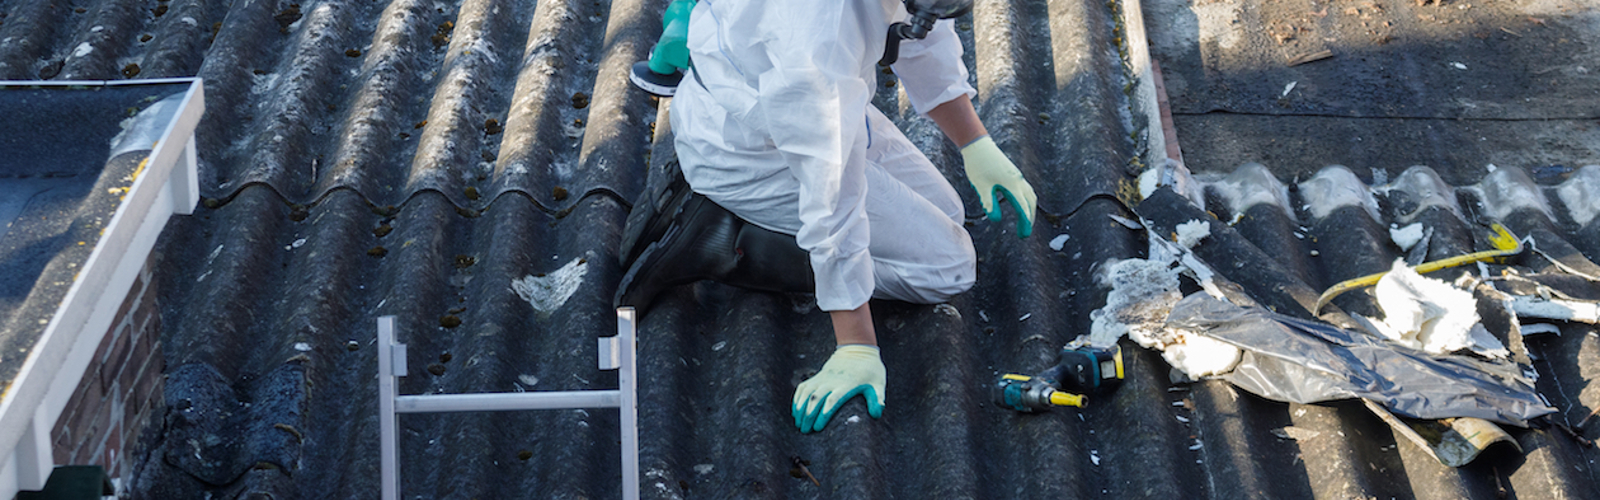 A person wearing protective clothing removing asbestos on a roof.